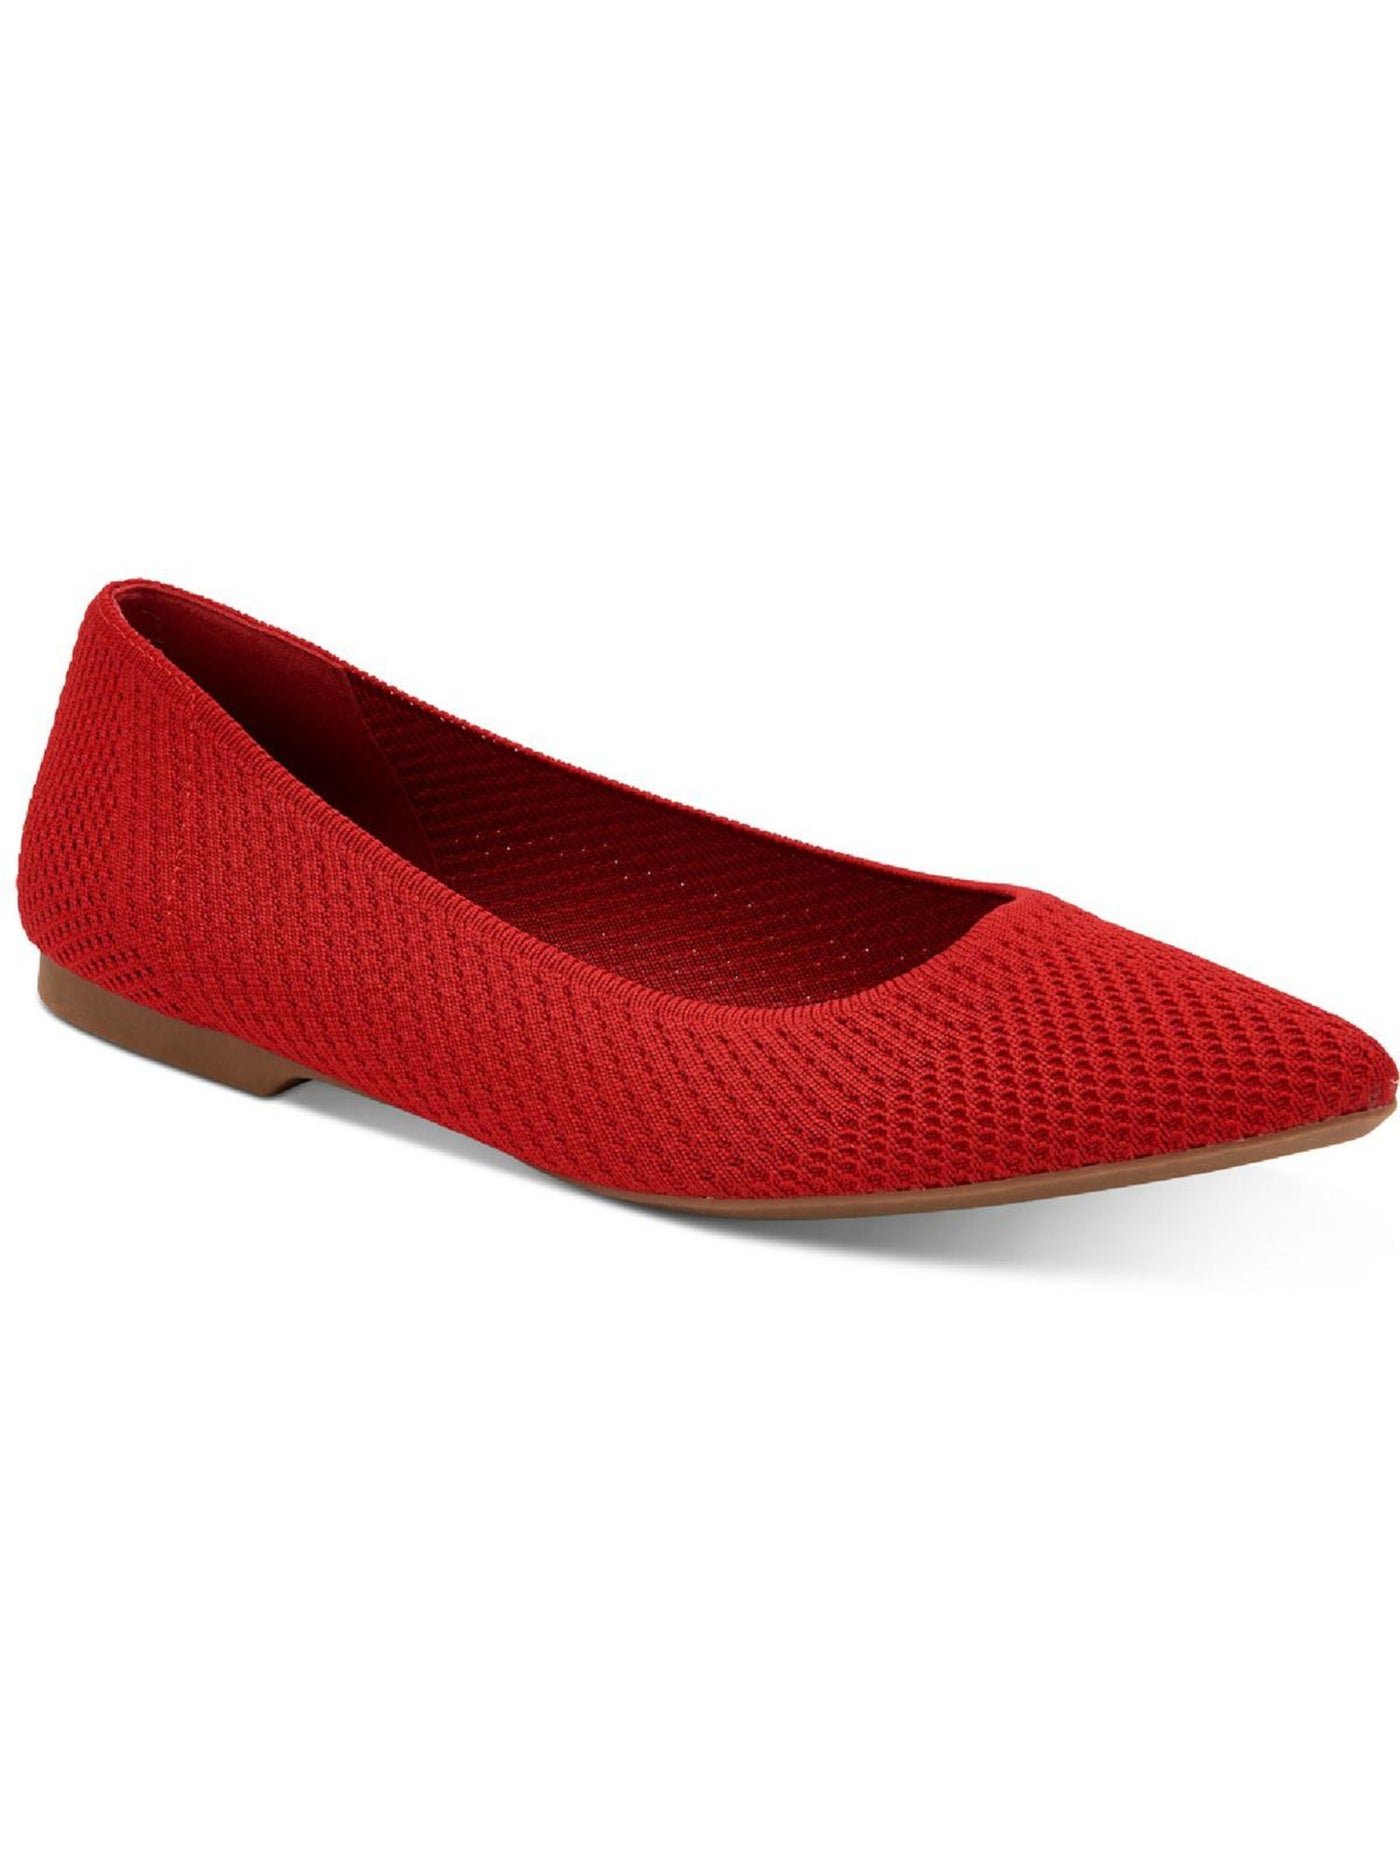 ALFANI Womens Red Knit Removable Insole Stretch Padded Poppyy Pointed Toe Slip On Ballet Flats 9 M